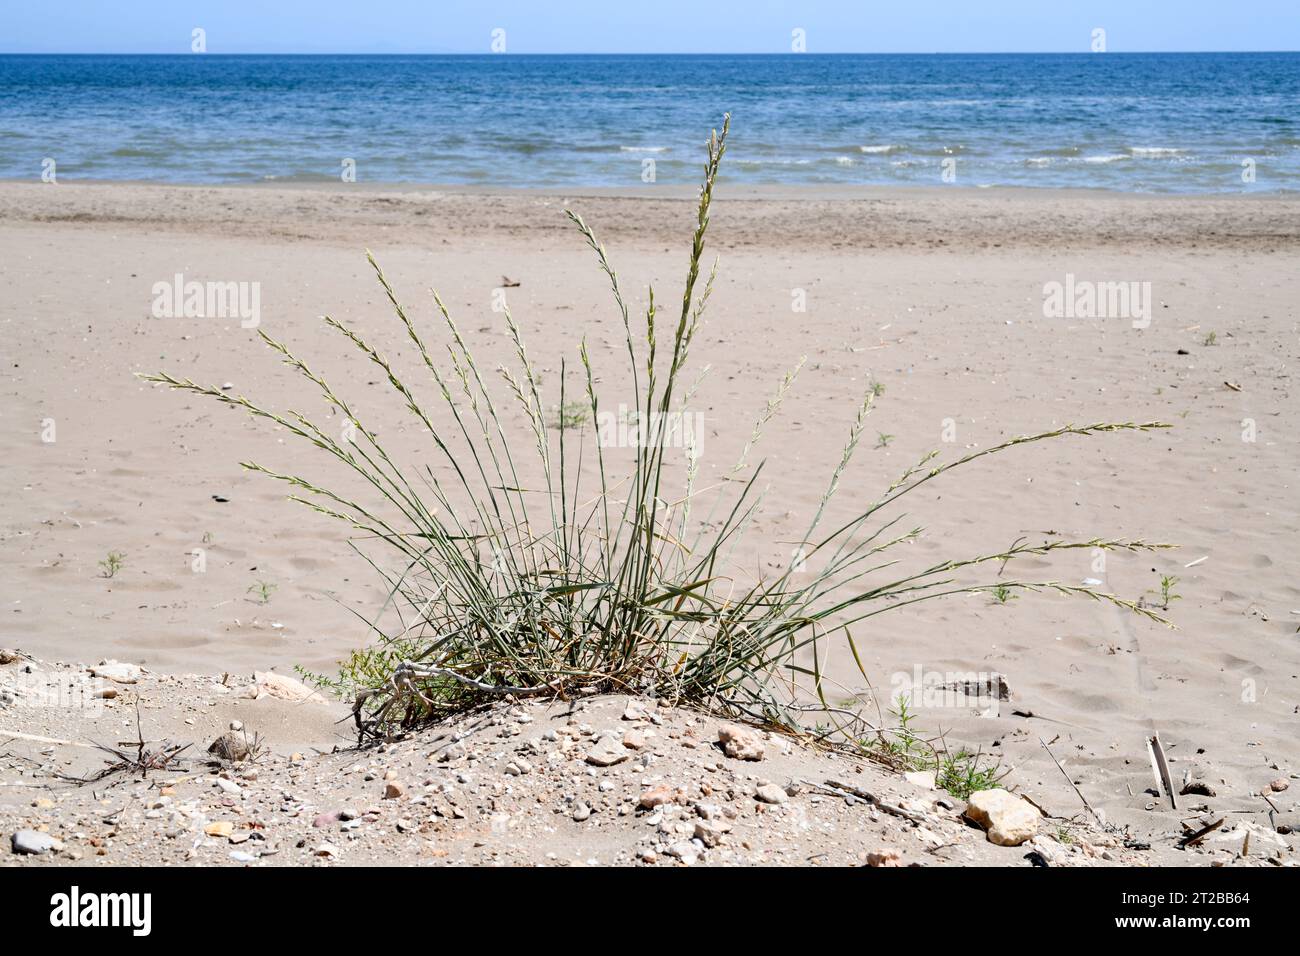 Sand couch-grass (Elymus farctus, Thinopyrum junceum or Agropyron junceum) is a perennial herb native to Eurasia coasts. This photo was taken in Delta Stock Photo